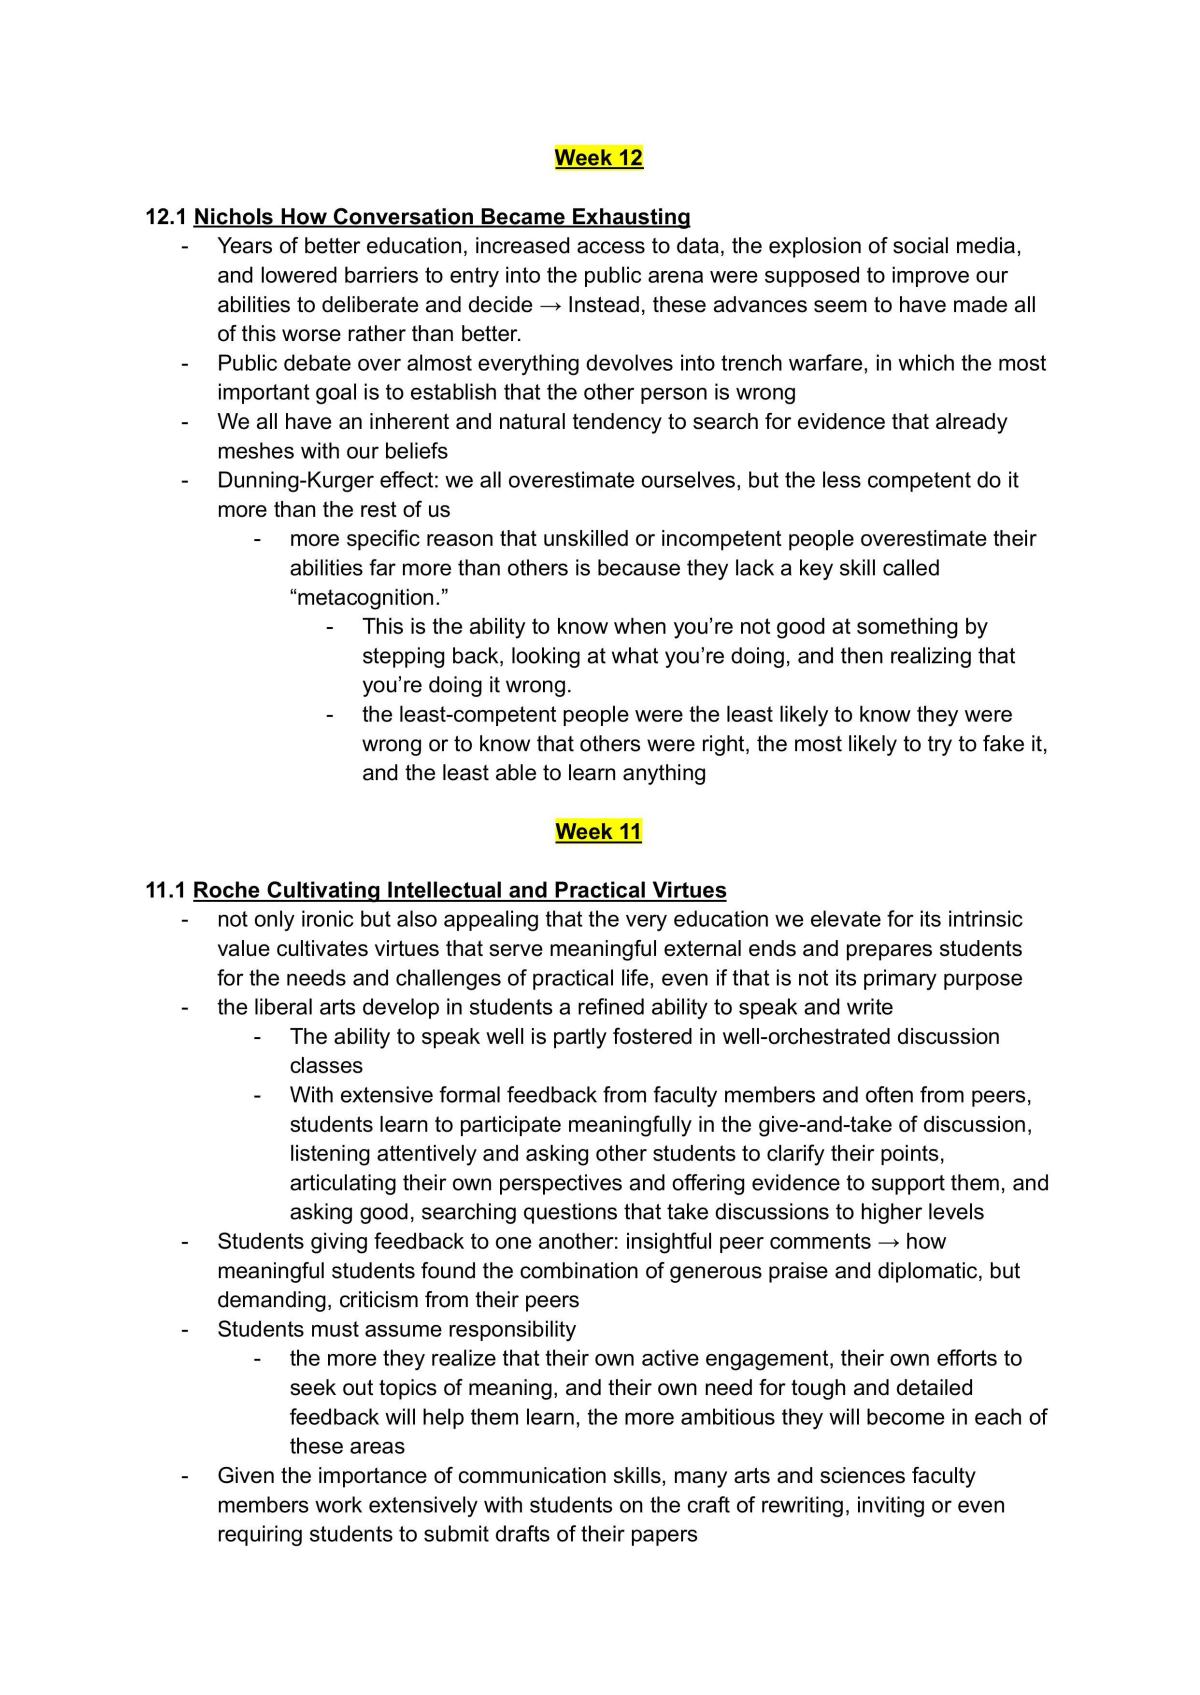 SOCG001 Full notes from readings - Page 1